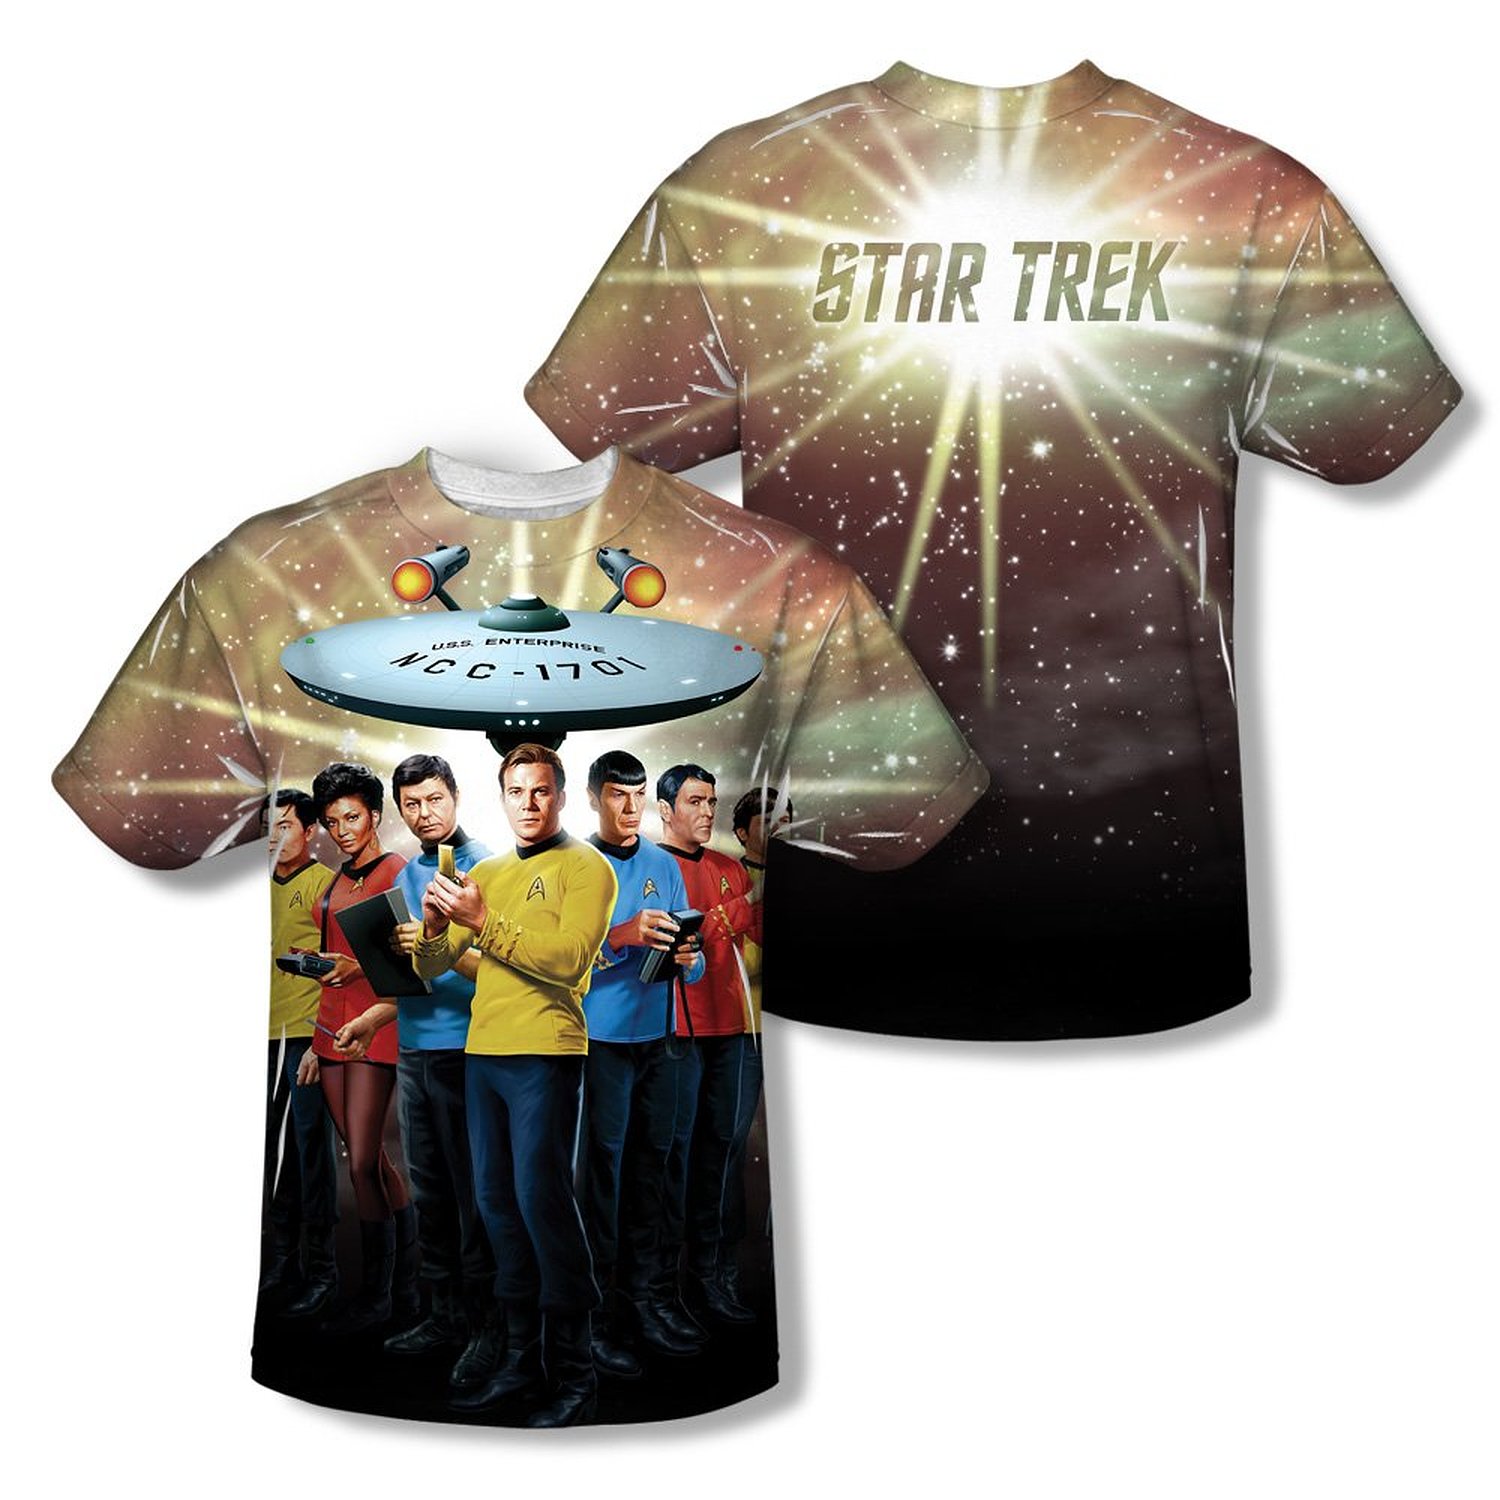 The Trek Collective: TOS, TNG, and Haynes Manual images on more awesome  sublimation T-shirts